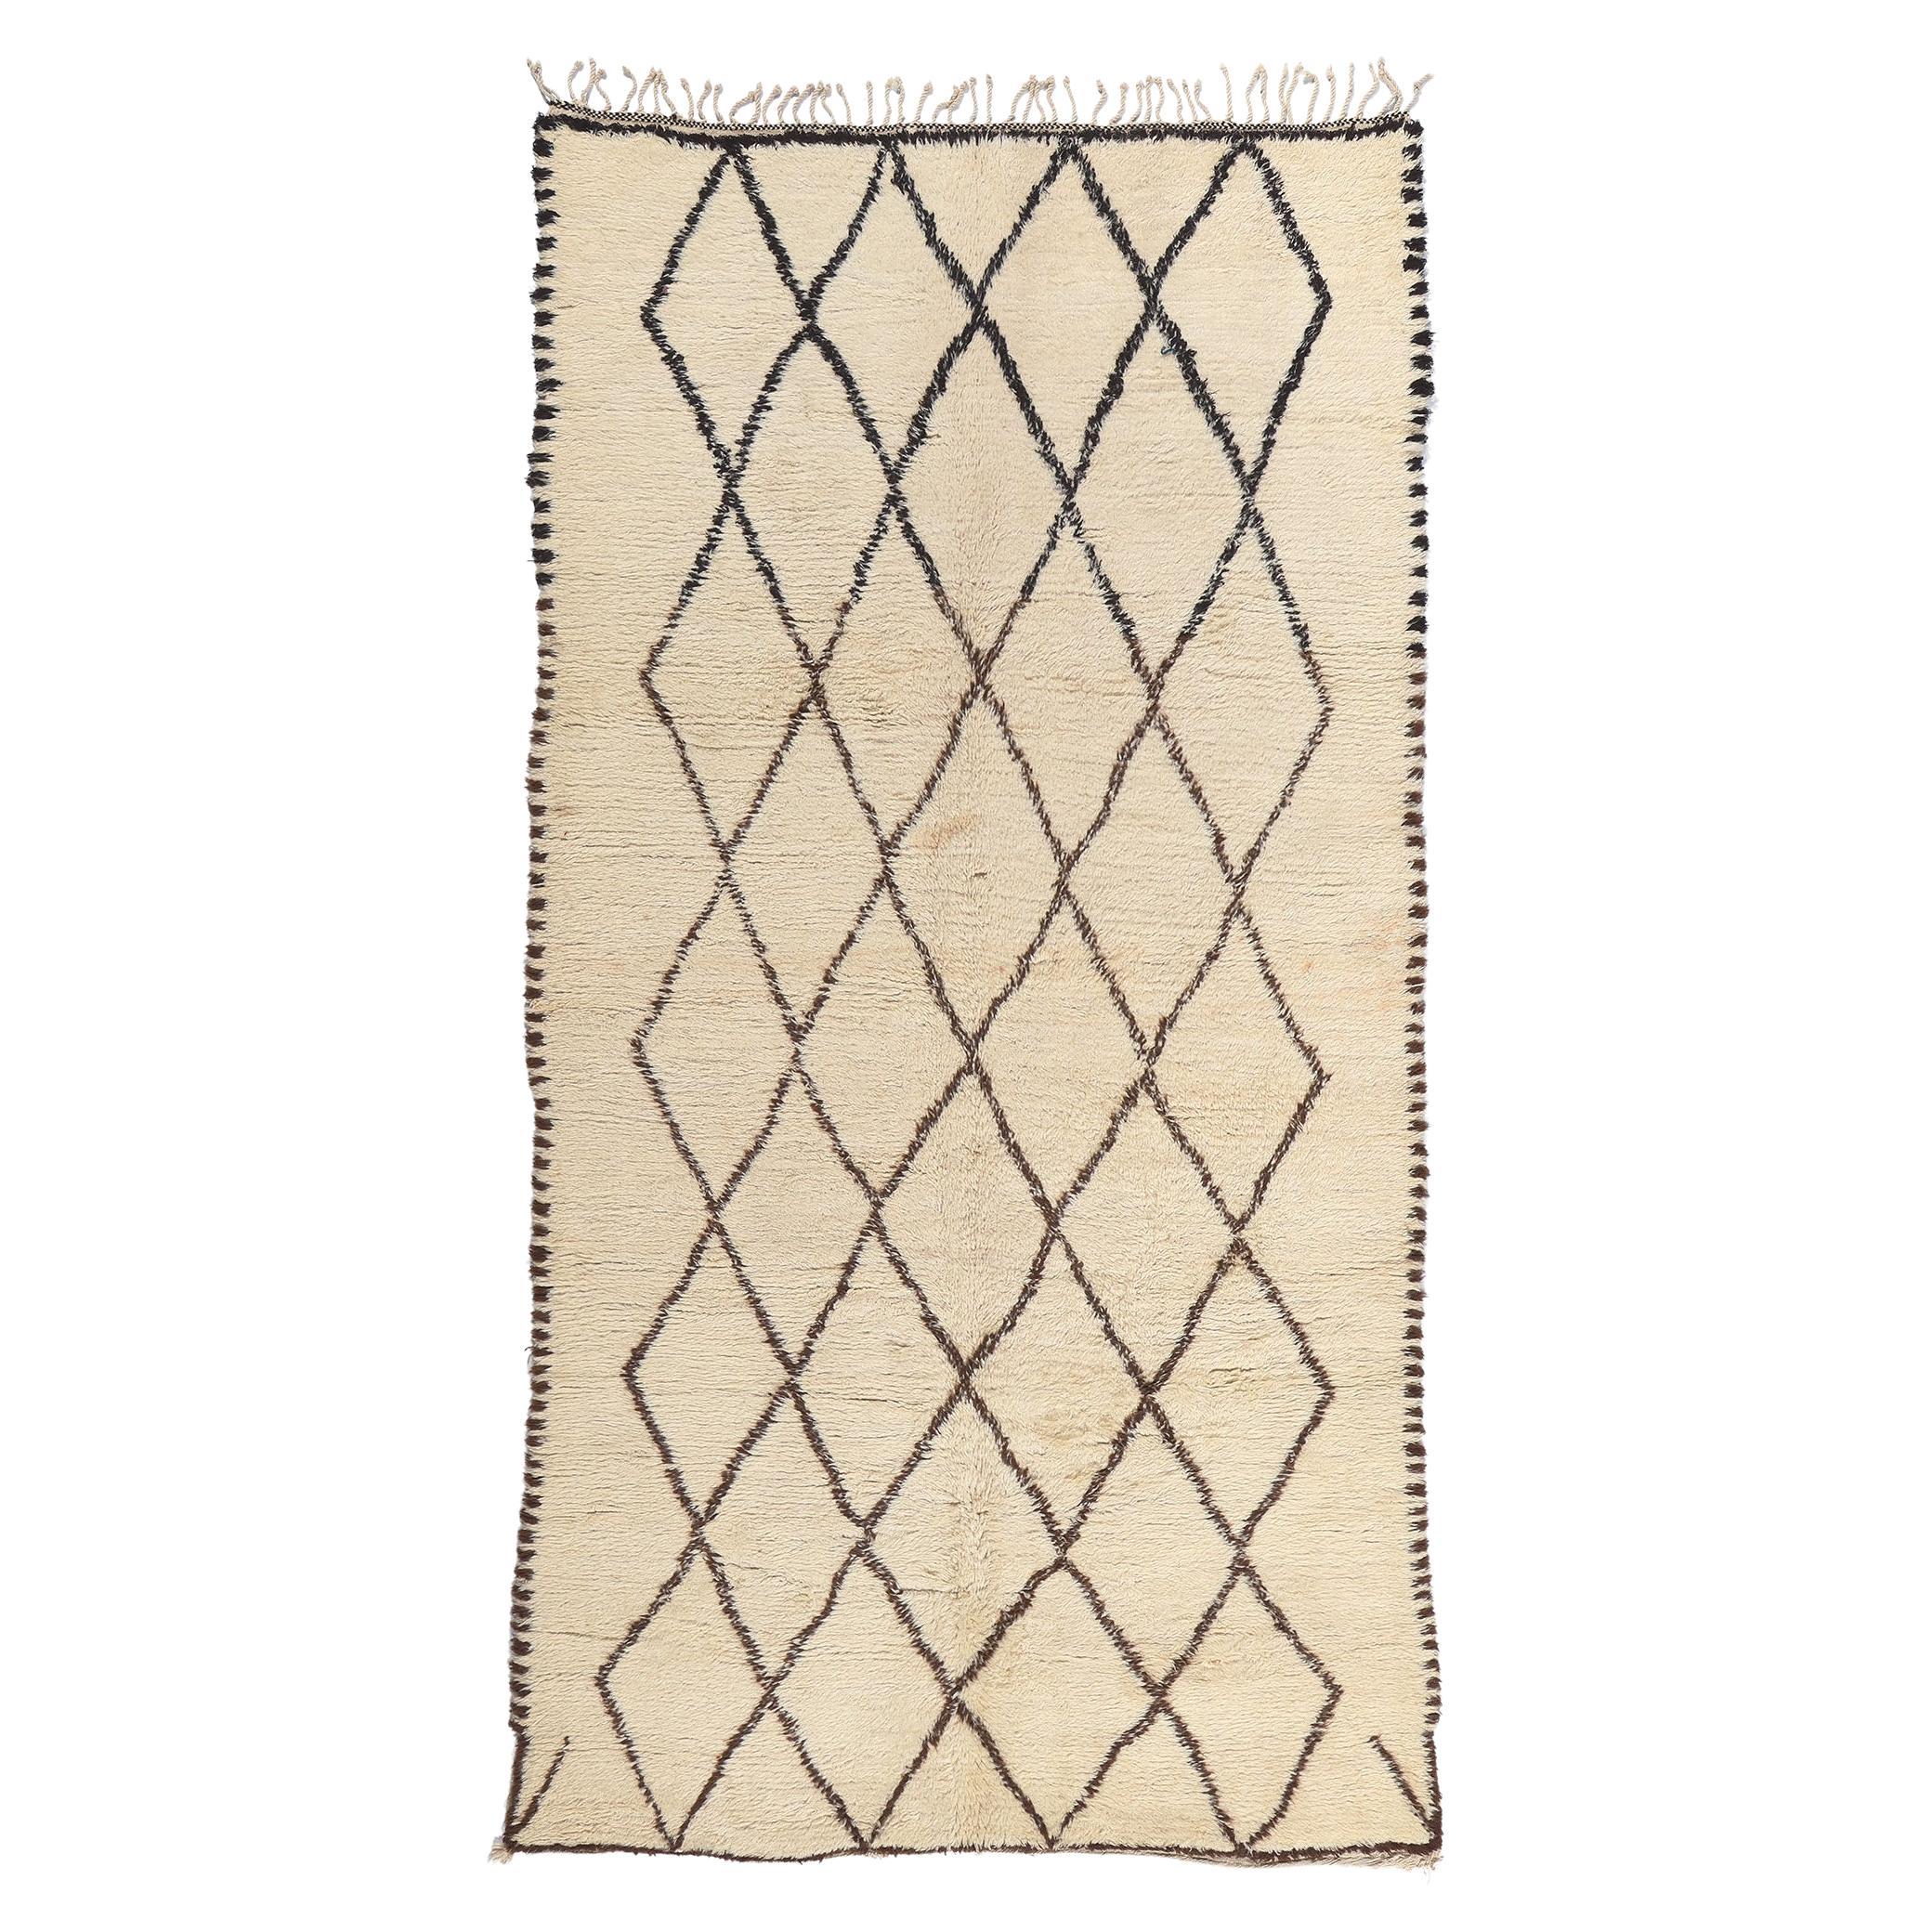 Vintage Moroccan Beni Ourain Rug, Mid-Century Modern Style Meets Shibui For Sale